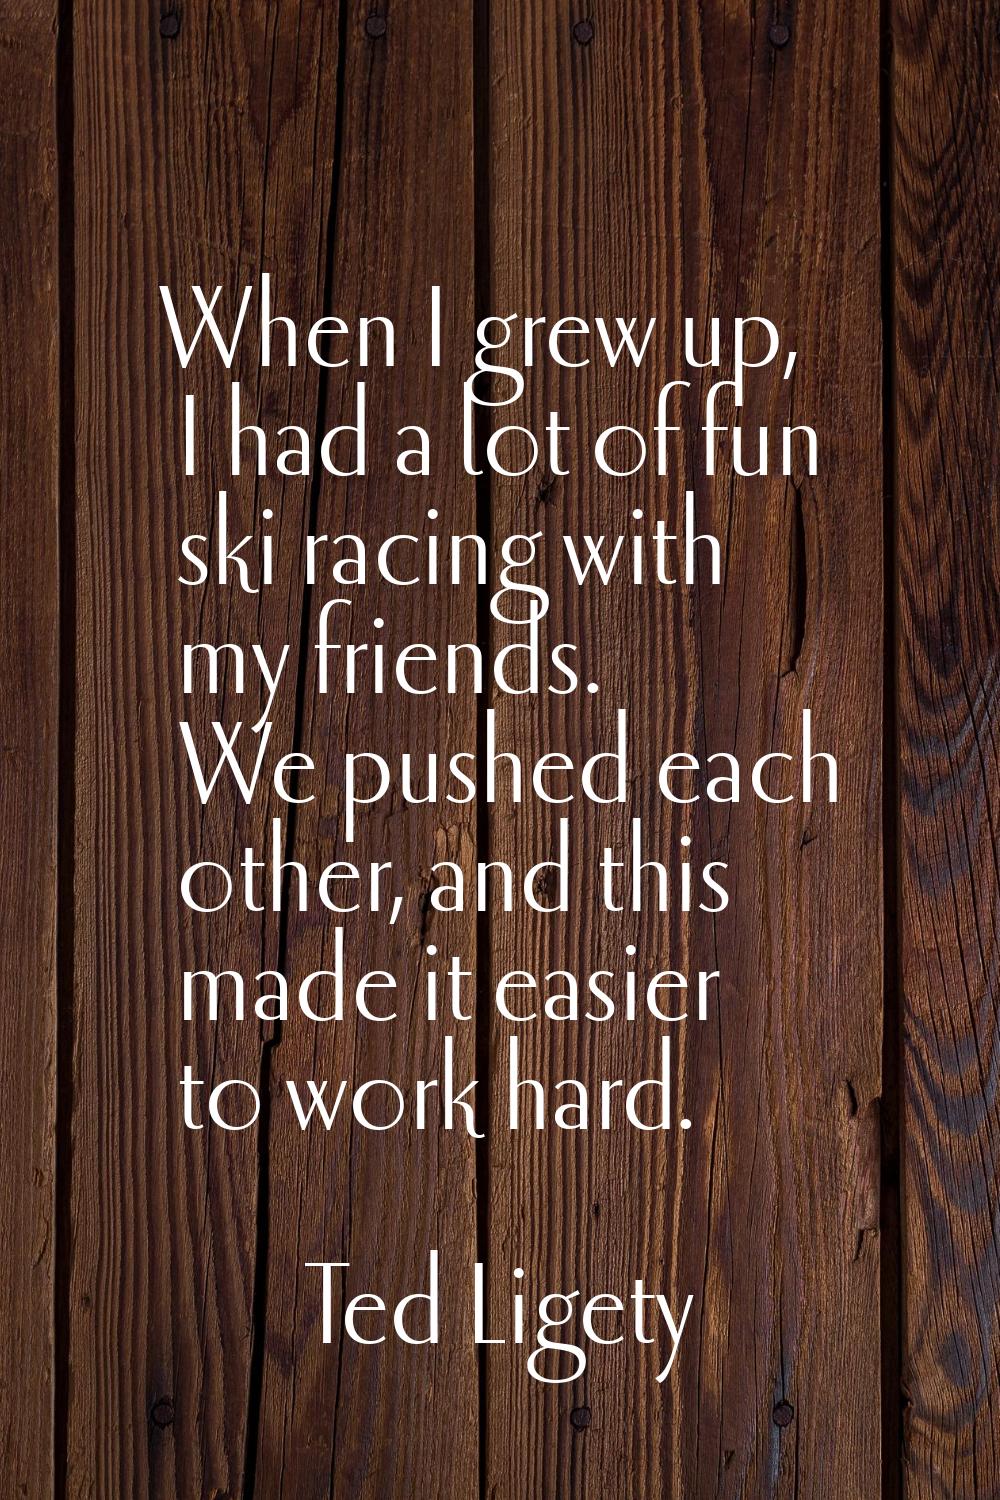 When I grew up, I had a lot of fun ski racing with my friends. We pushed each other, and this made 